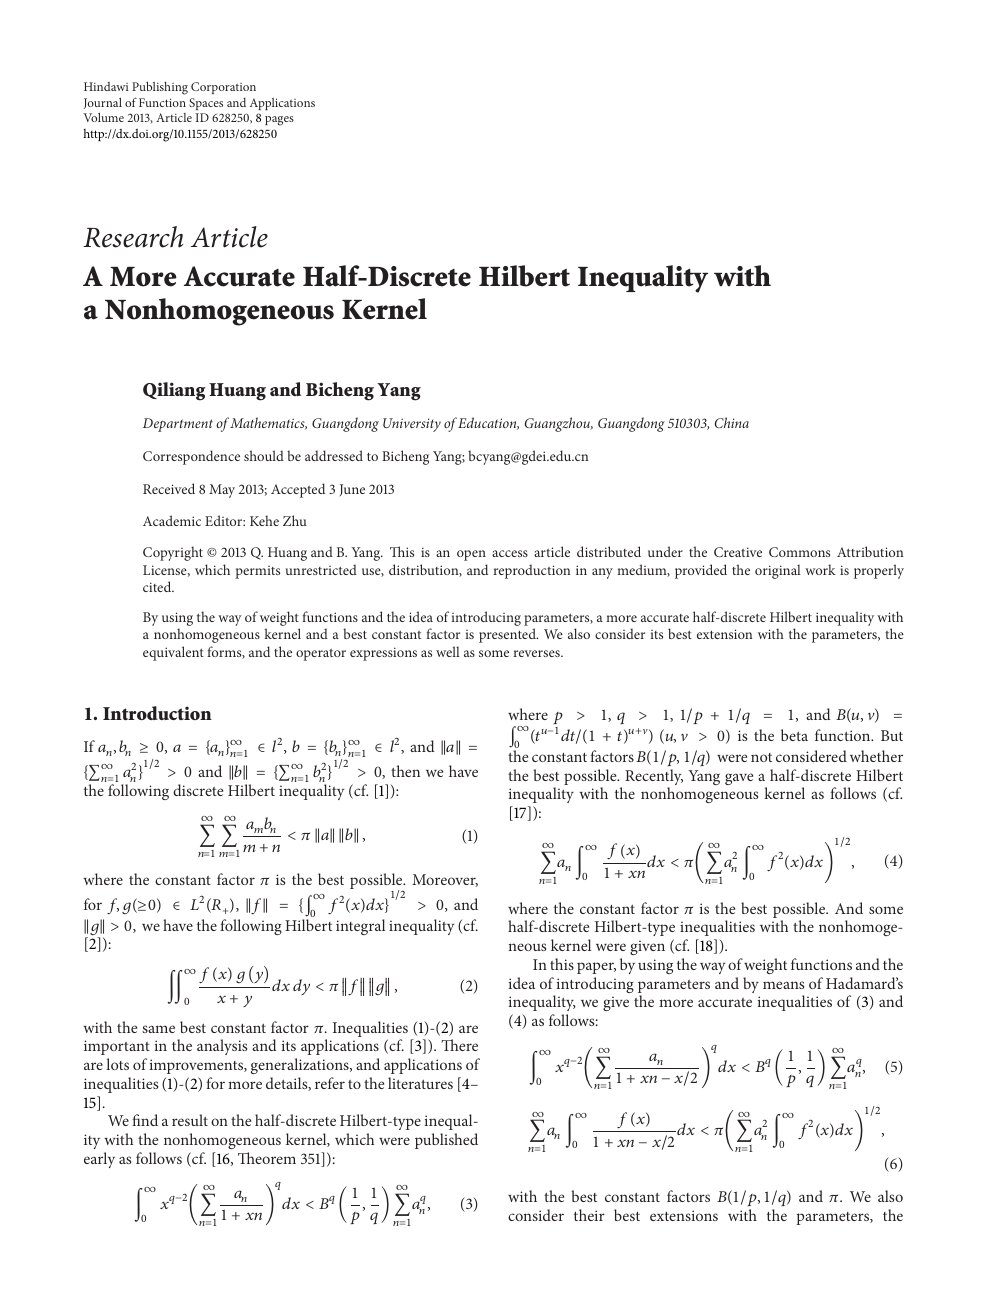 A More Accurate Half Discrete Hilbert Inequality With A Nonhomogeneous Kernel Topic Of Research Paper In Mathematics Download Scholarly Article Pdf And Read For Free On Cyberleninka Open Science Hub